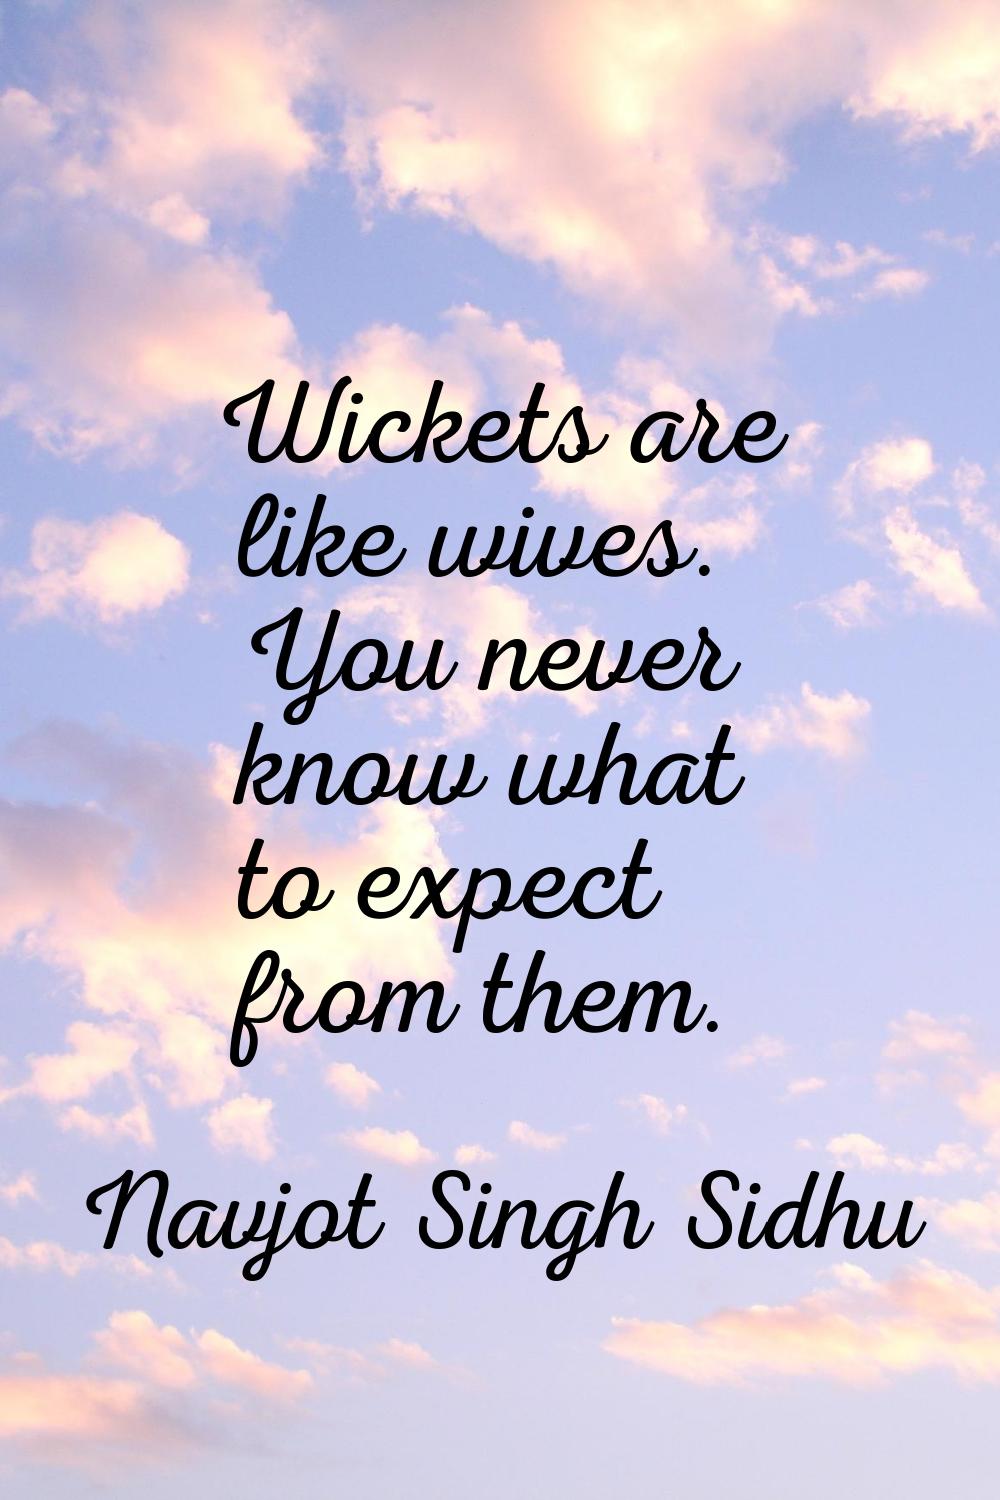 Wickets are like wives. You never know what to expect from them.